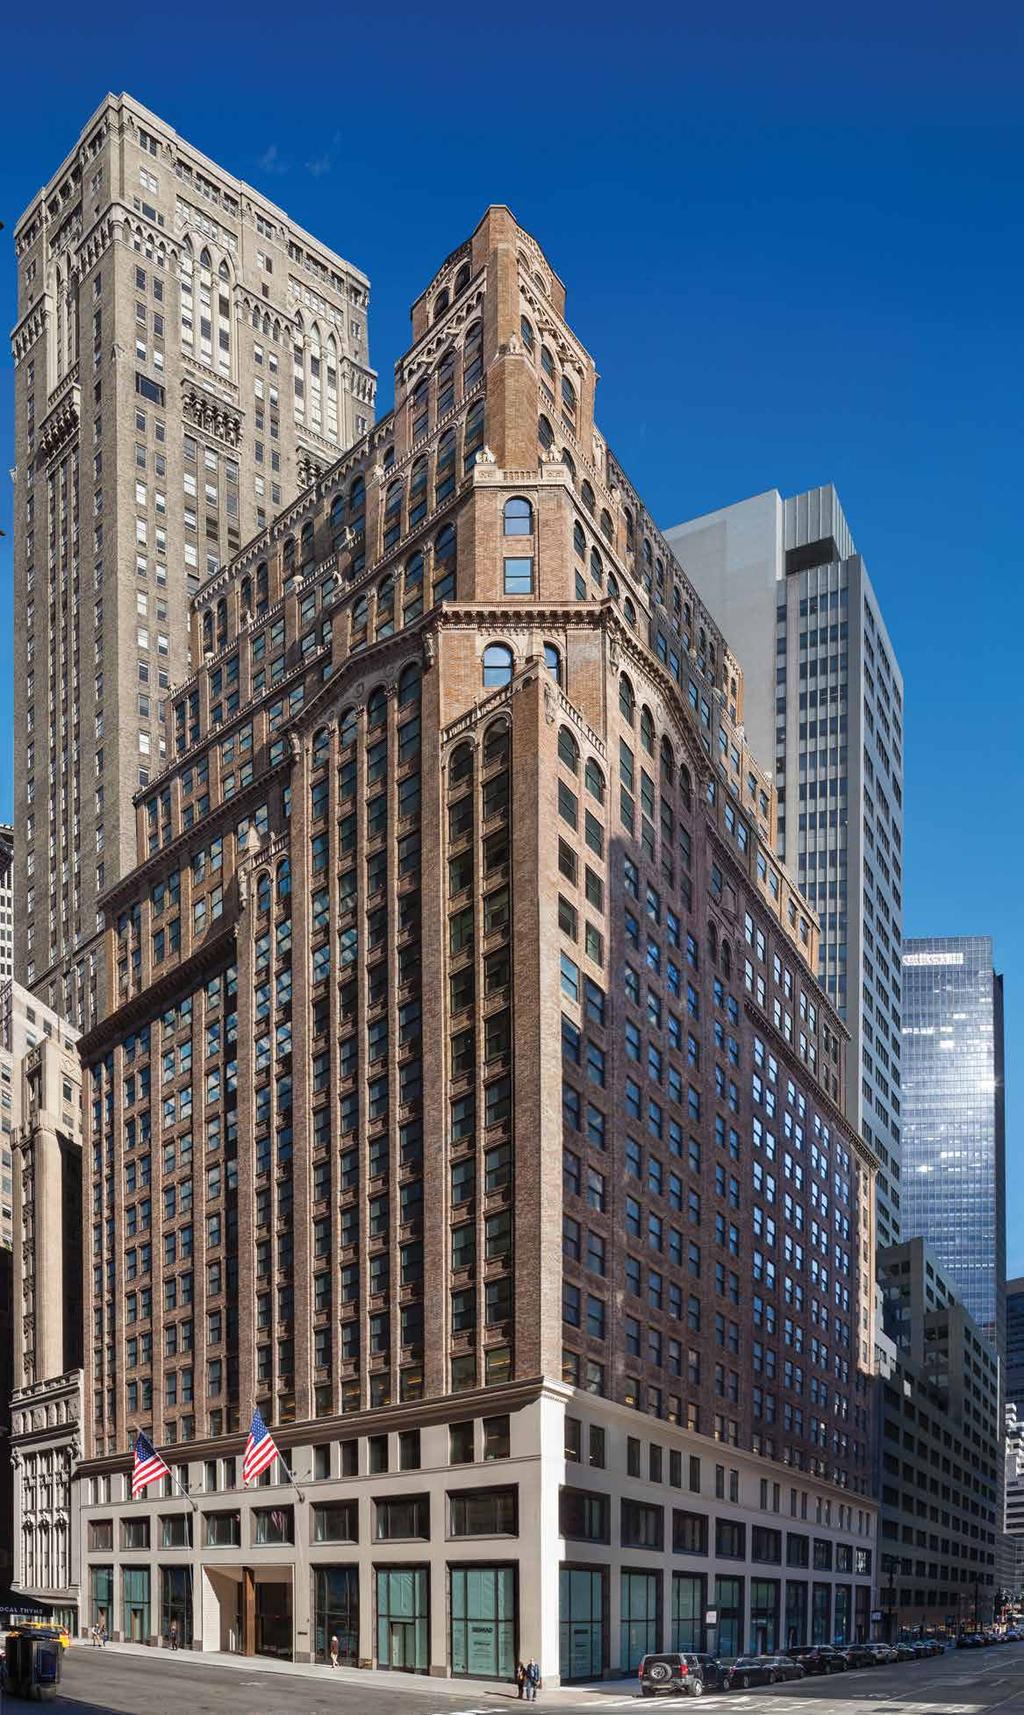 285 Madison 285 Madison Avenue is an emblem for the emerging Bryant Park district and a vibrant mix of business tradition and innovation.